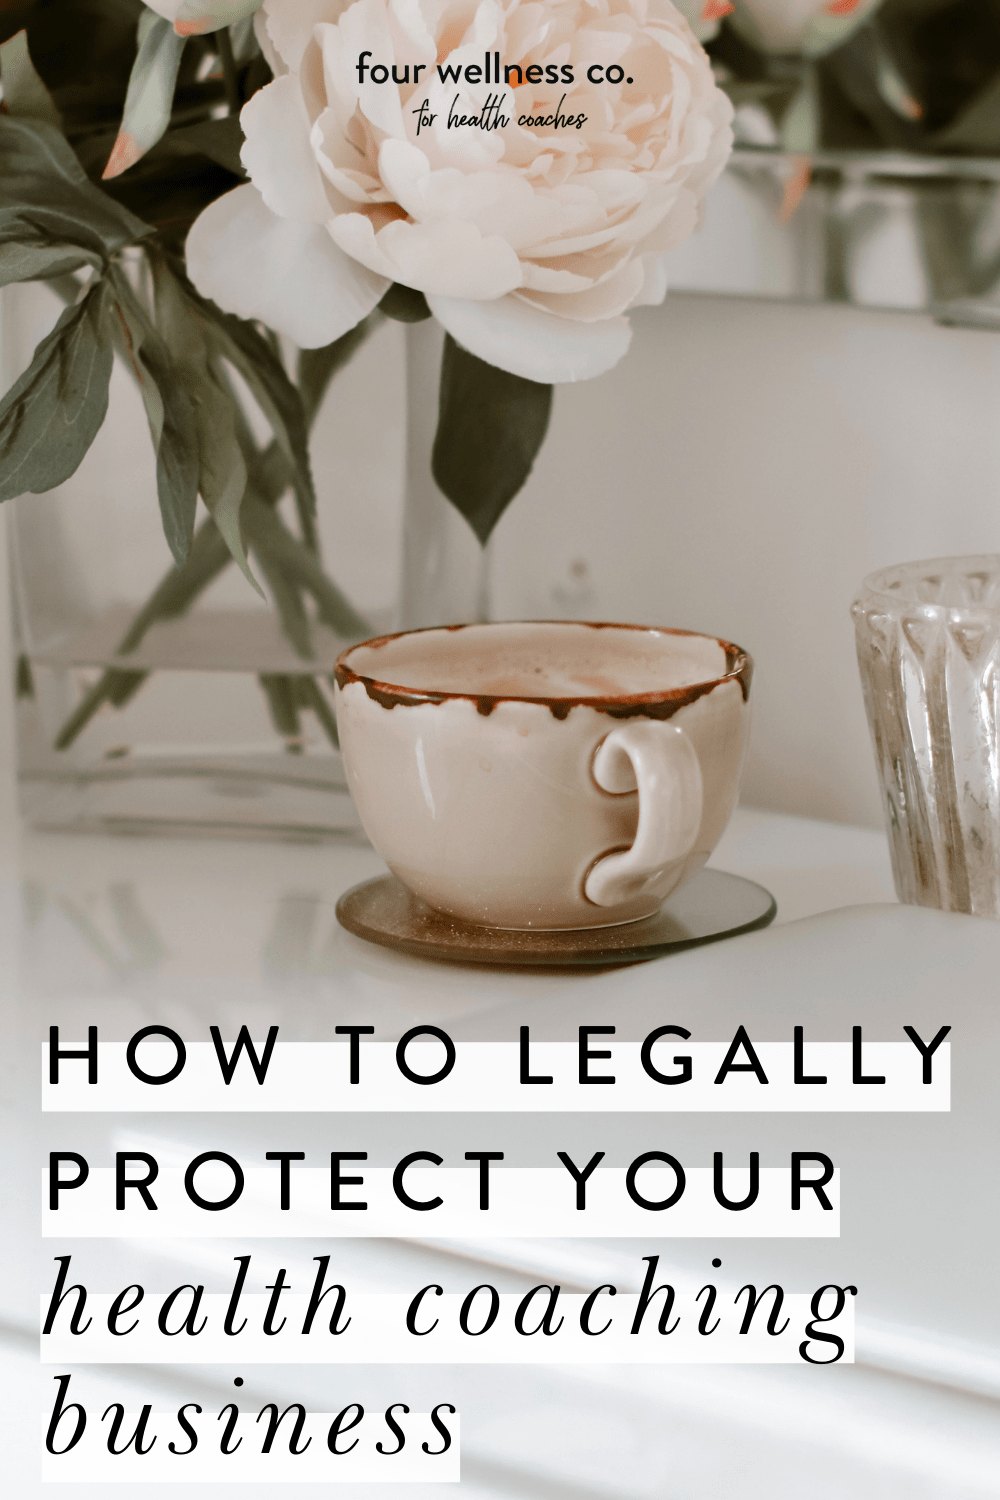 How to Legally Protect Your Health Coaching Business // Four Wellness Co.